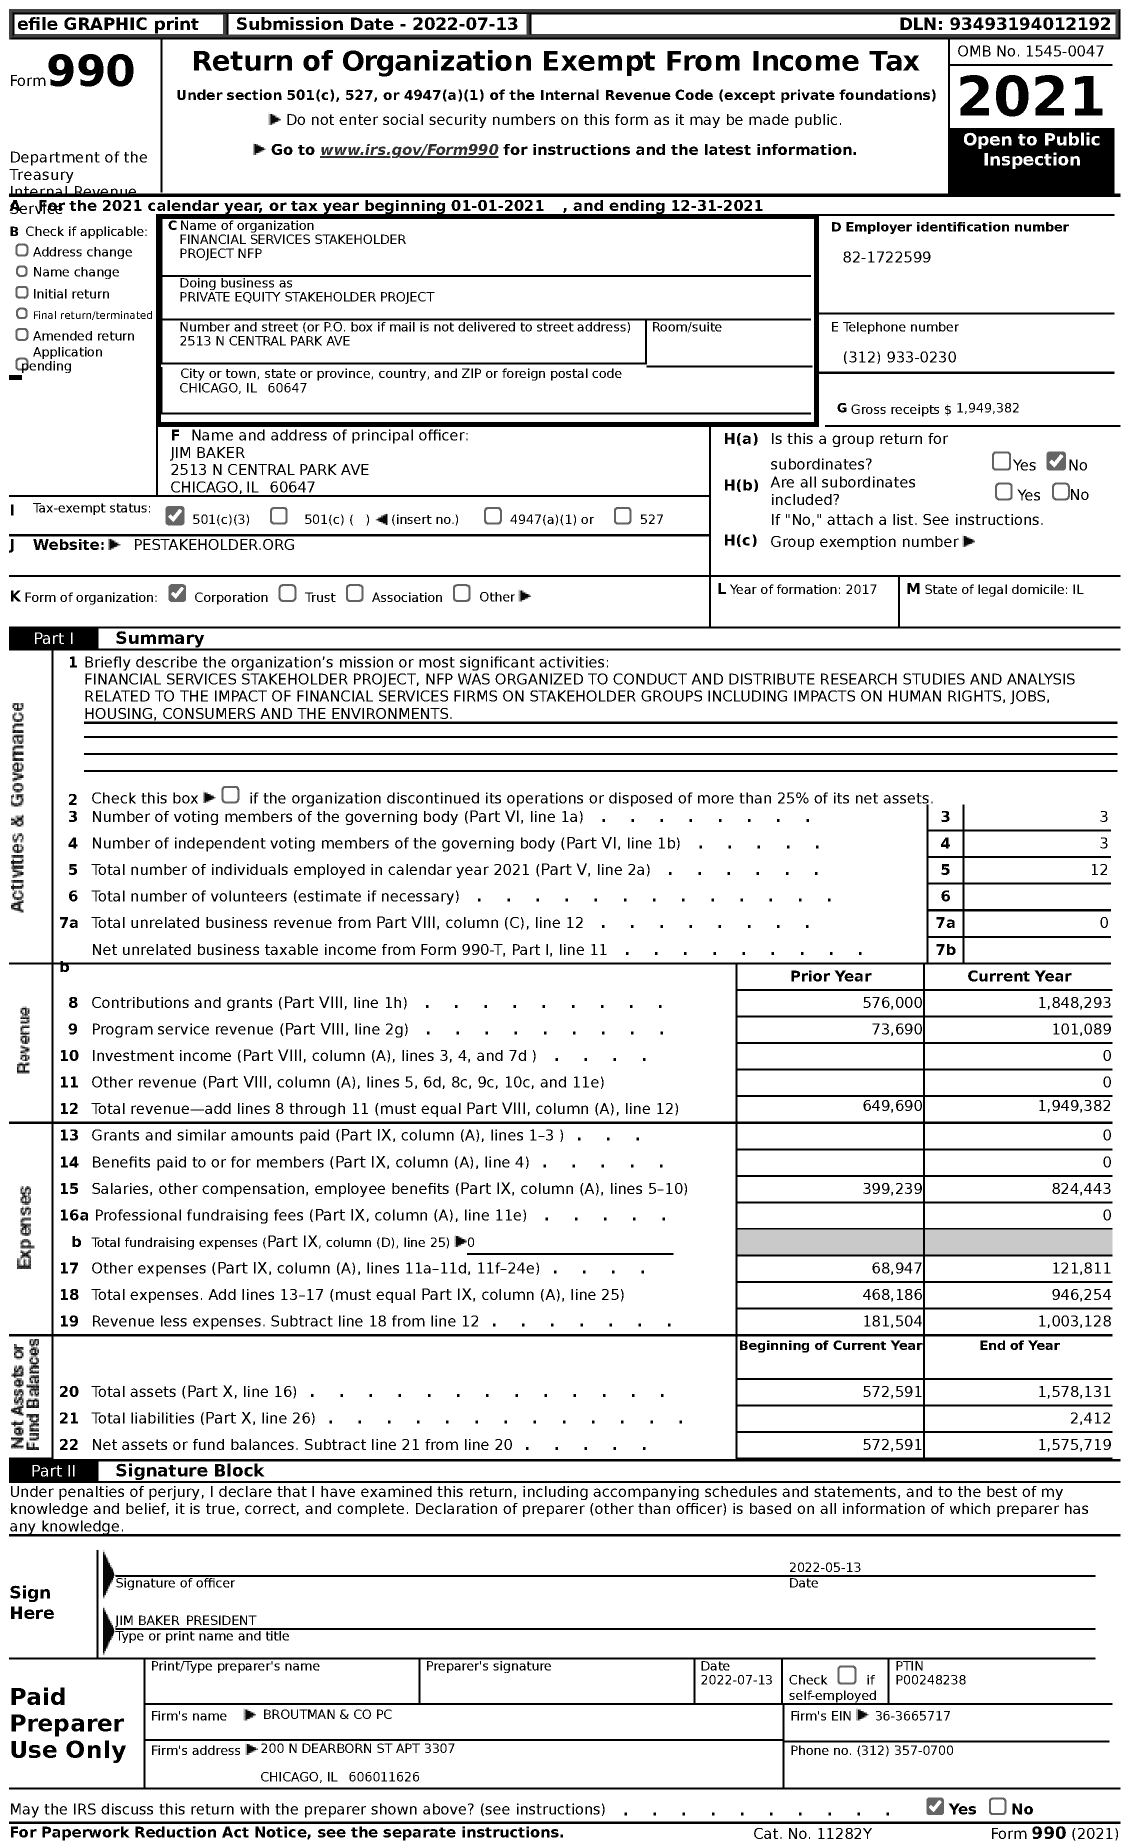 Image of first page of 2021 Form 990 for Private Equity Stakeholder Project